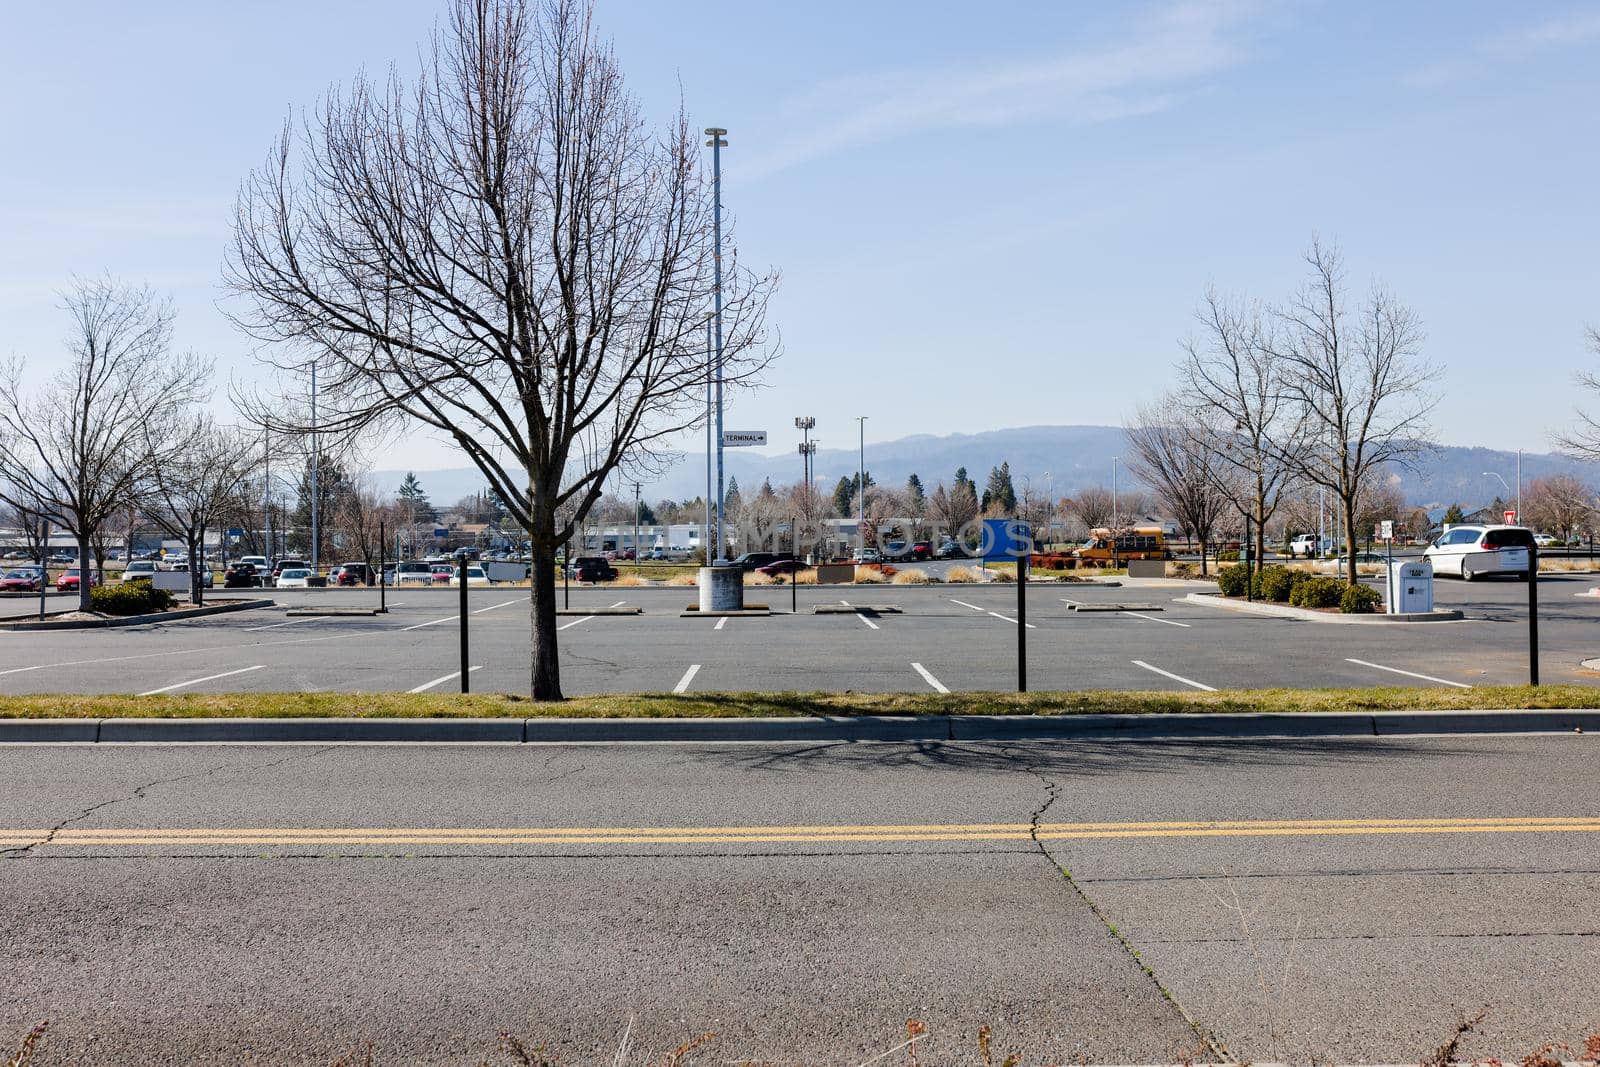 Peaceful view of leafless trees in empty parking lot on sunny day. Bright blue skyline above car park with trees and mountains as background. Vehicles and outdoors